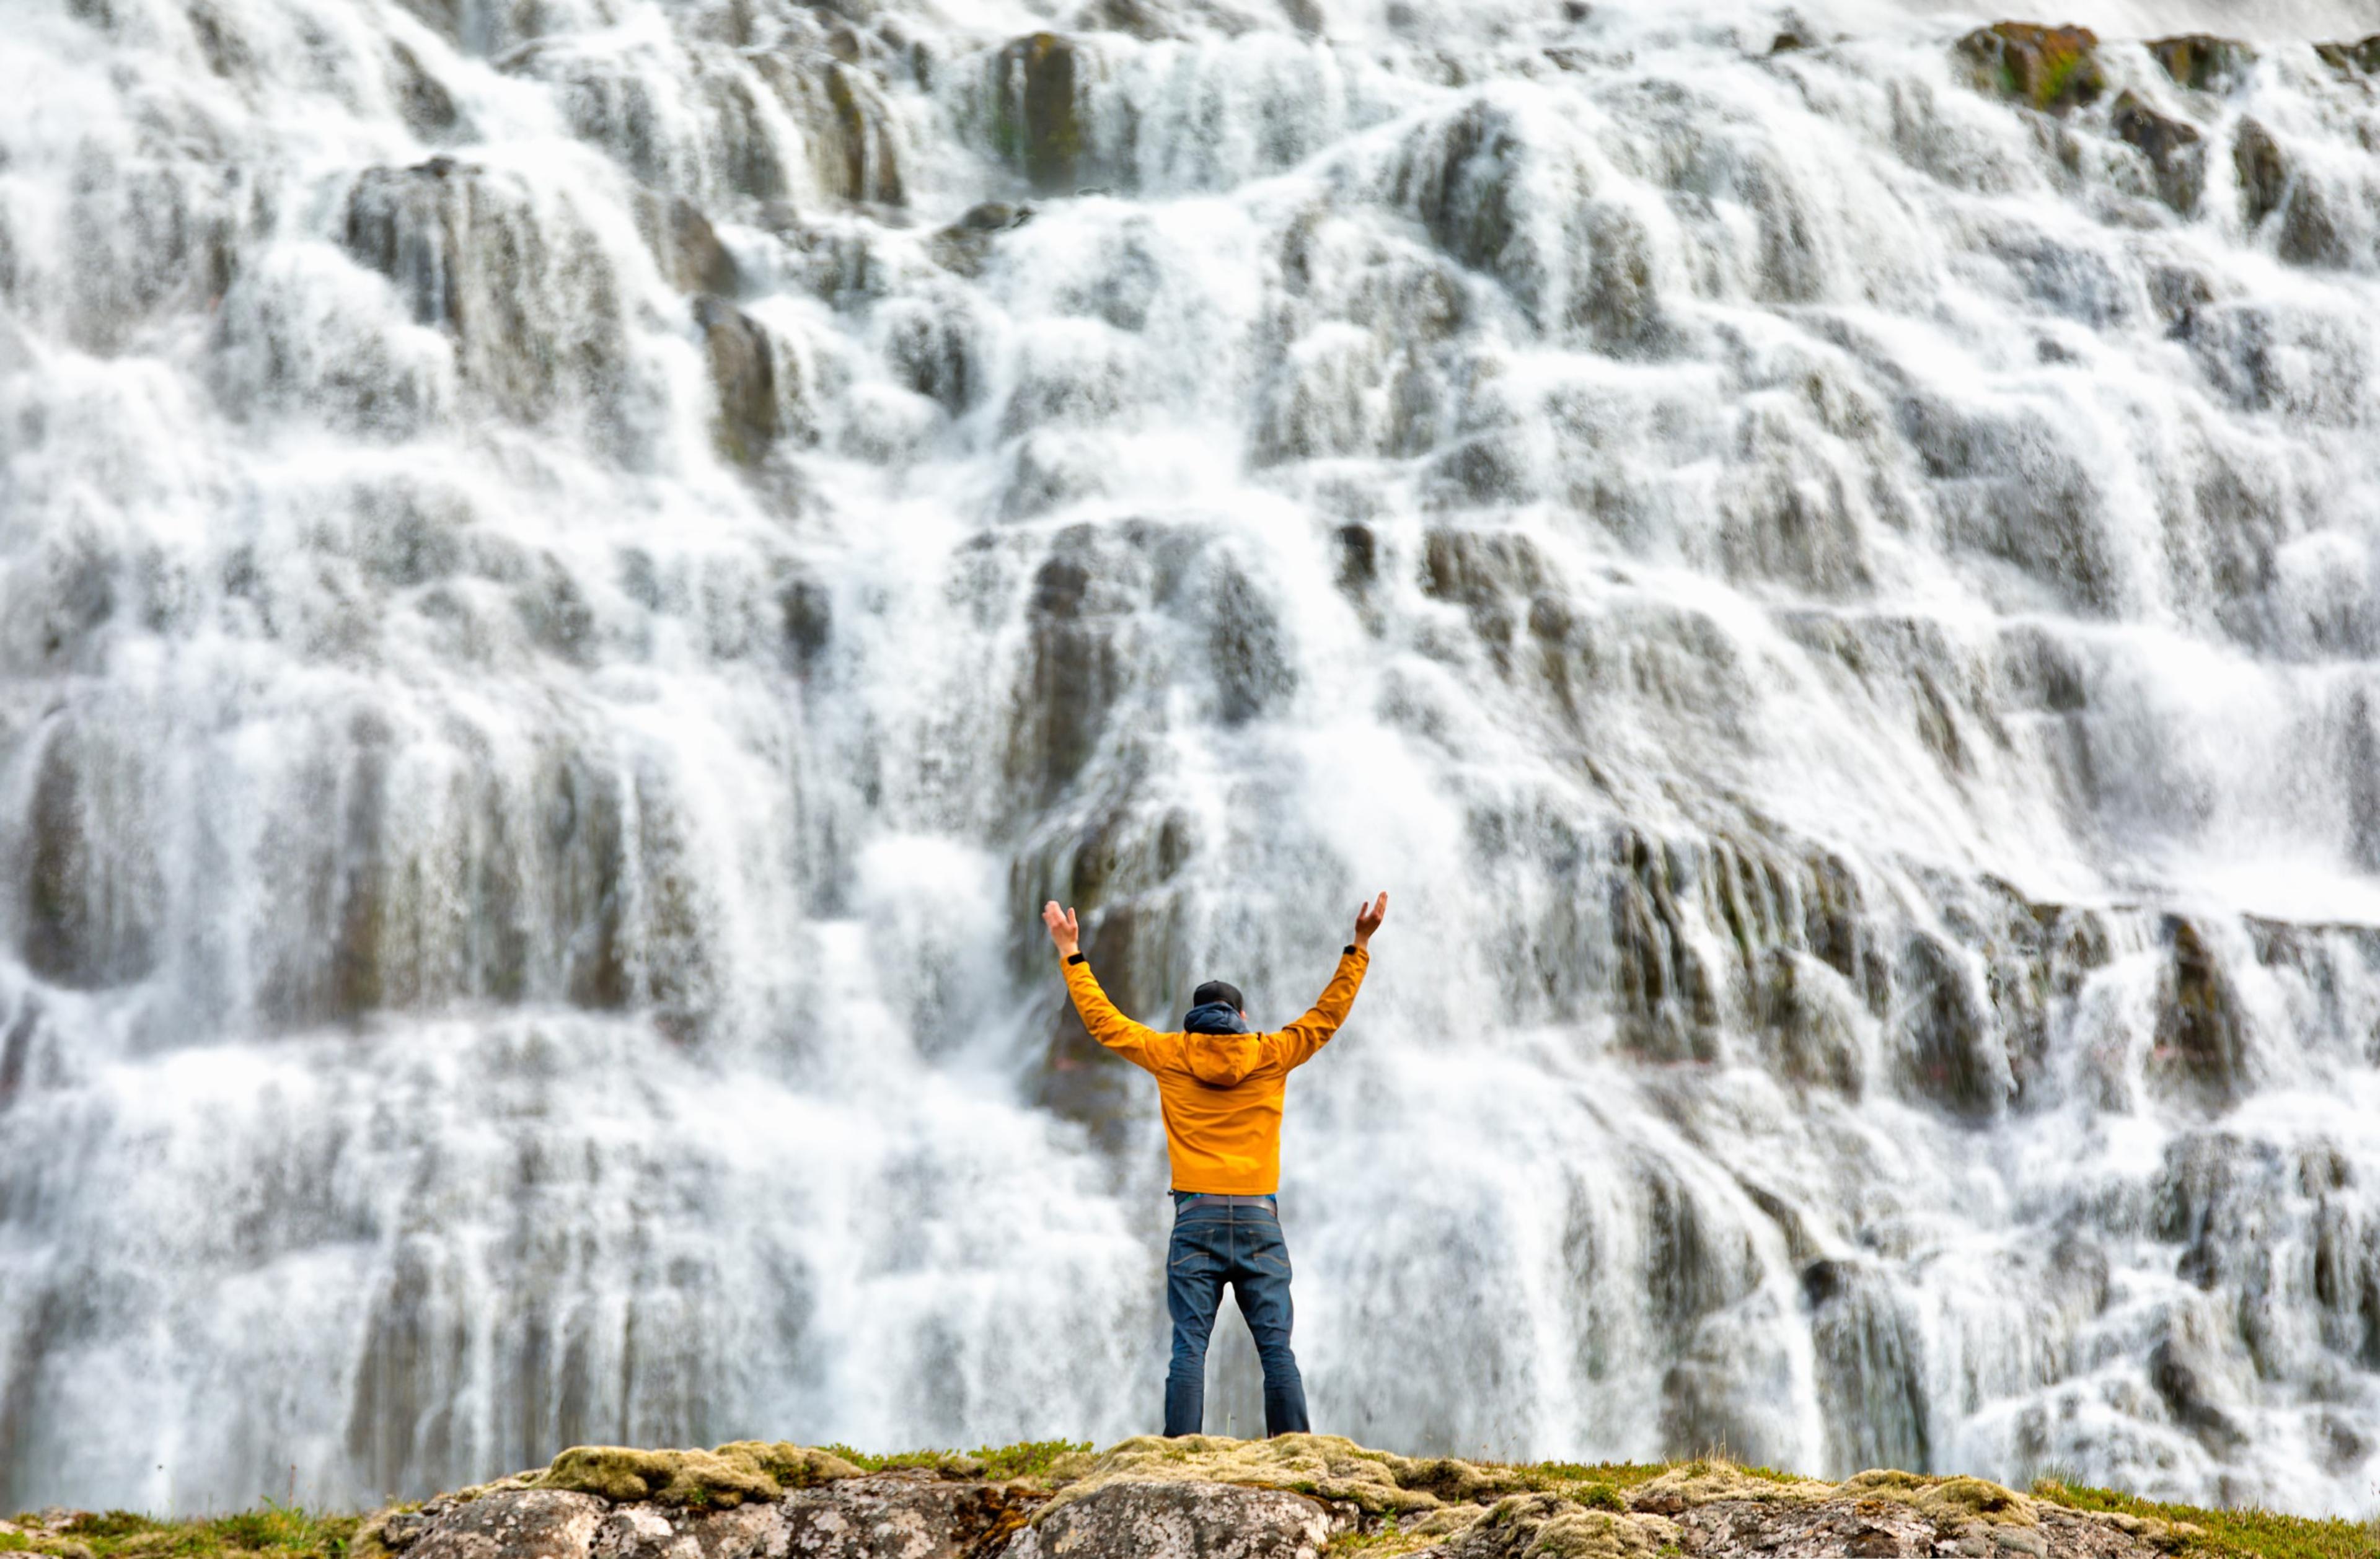 A person standing in front of a wide, white cascade with hands raised into the air